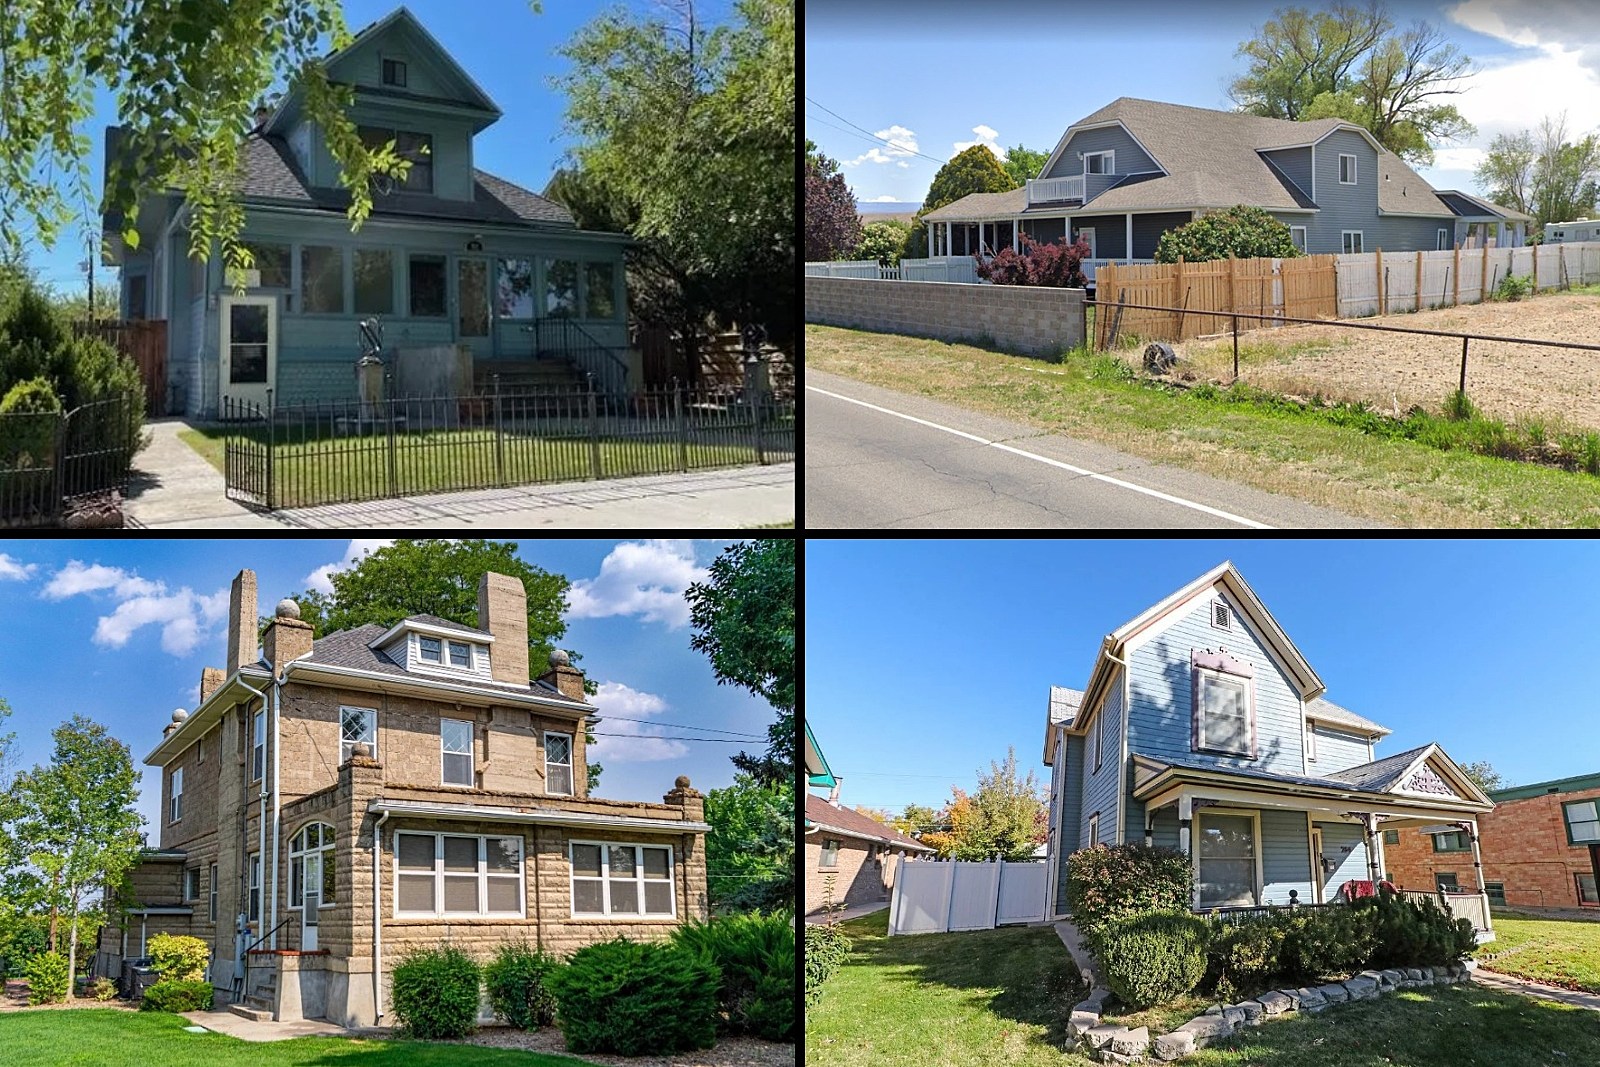 30 Pictures of Grand Junction Houses That Are Over 100 Years Old